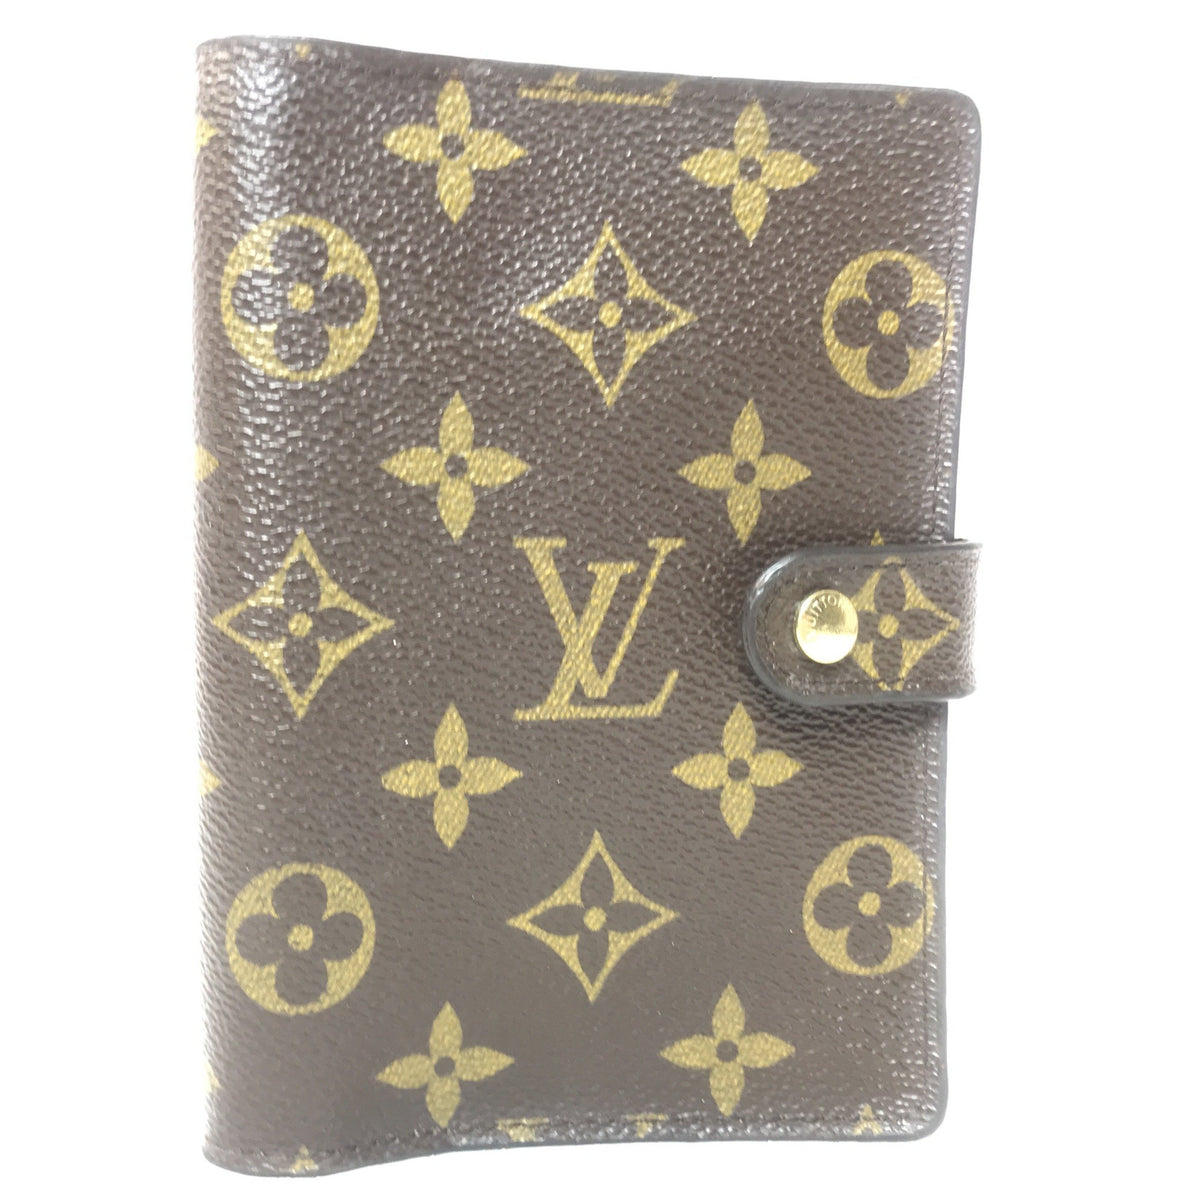 Authentic preloved agenda PM/small ring agenda with 2 LV emblem, SP1058